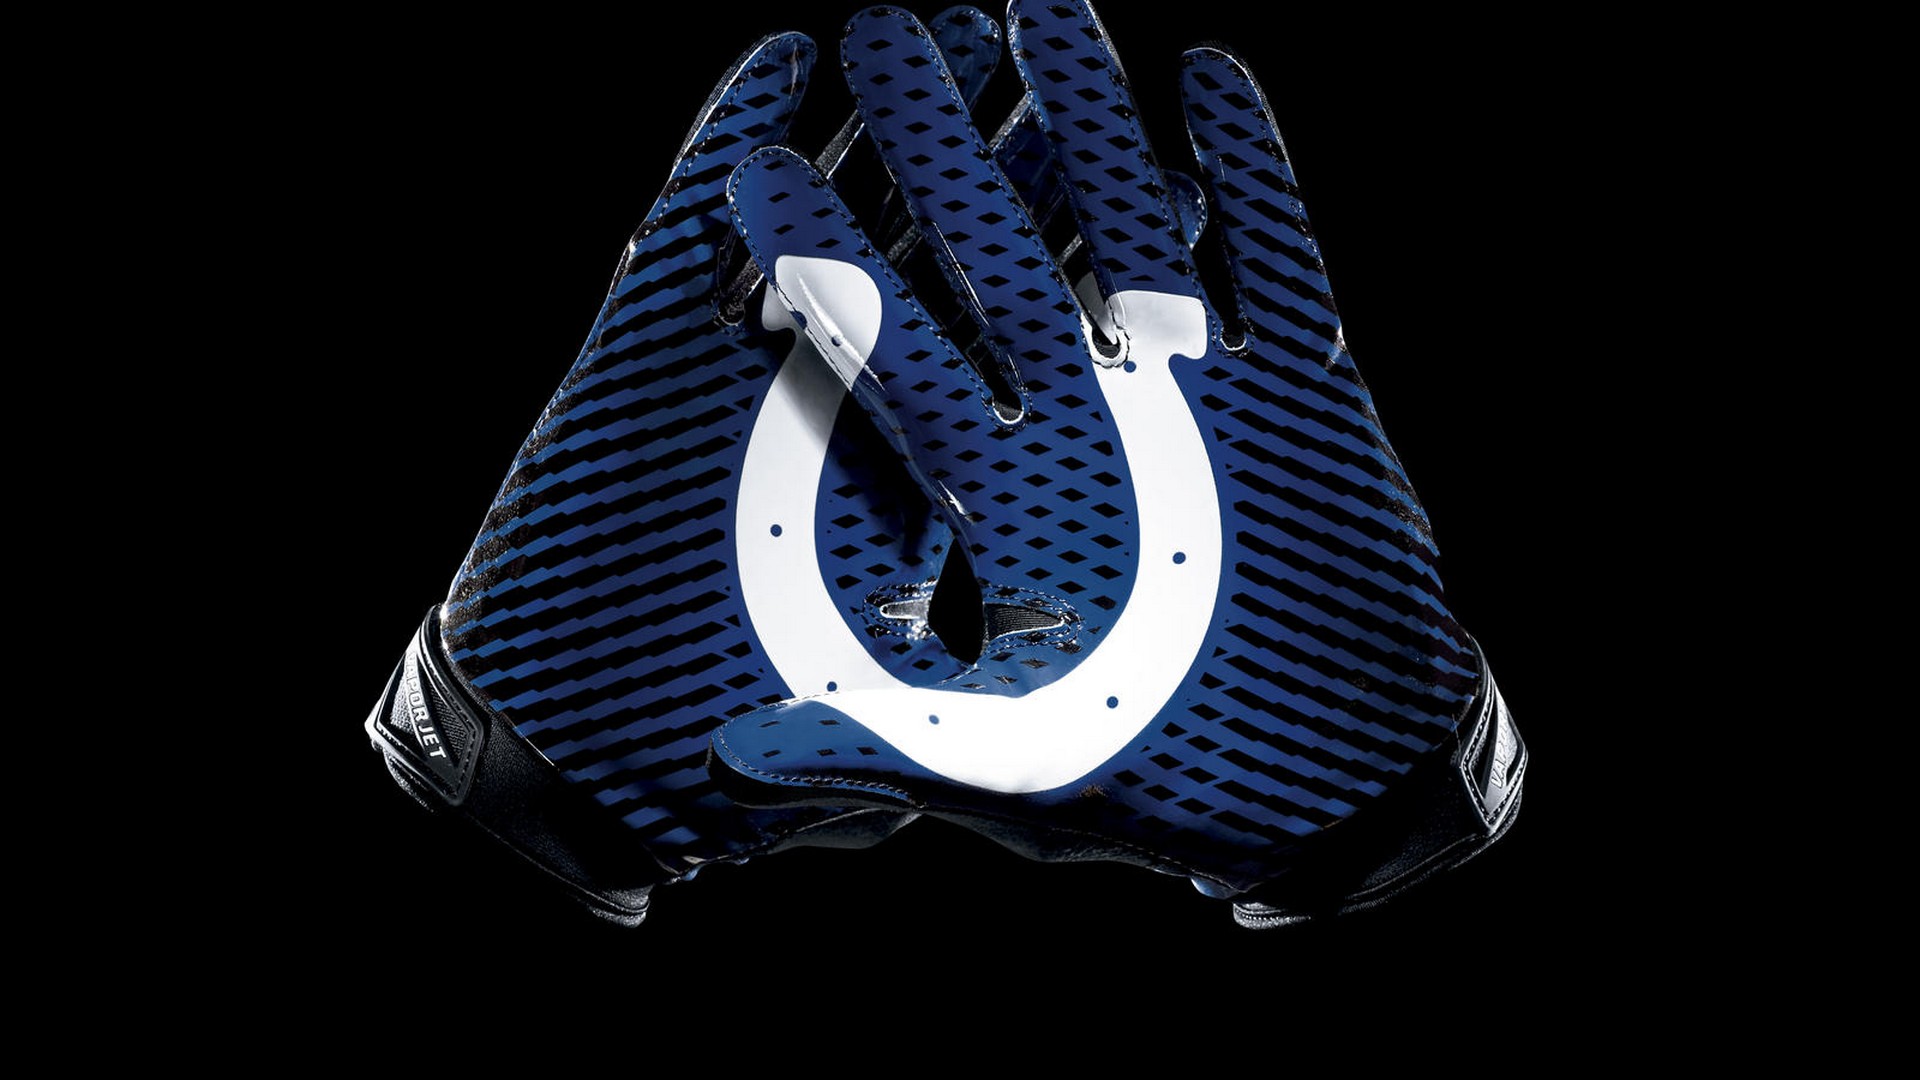 Indianapolis Colts NFL For PC Wallpaper With Resolution 1920X1080 pixel. You can make this wallpaper for your Mac or Windows Desktop Background, iPhone, Android or Tablet and another Smartphone device for free